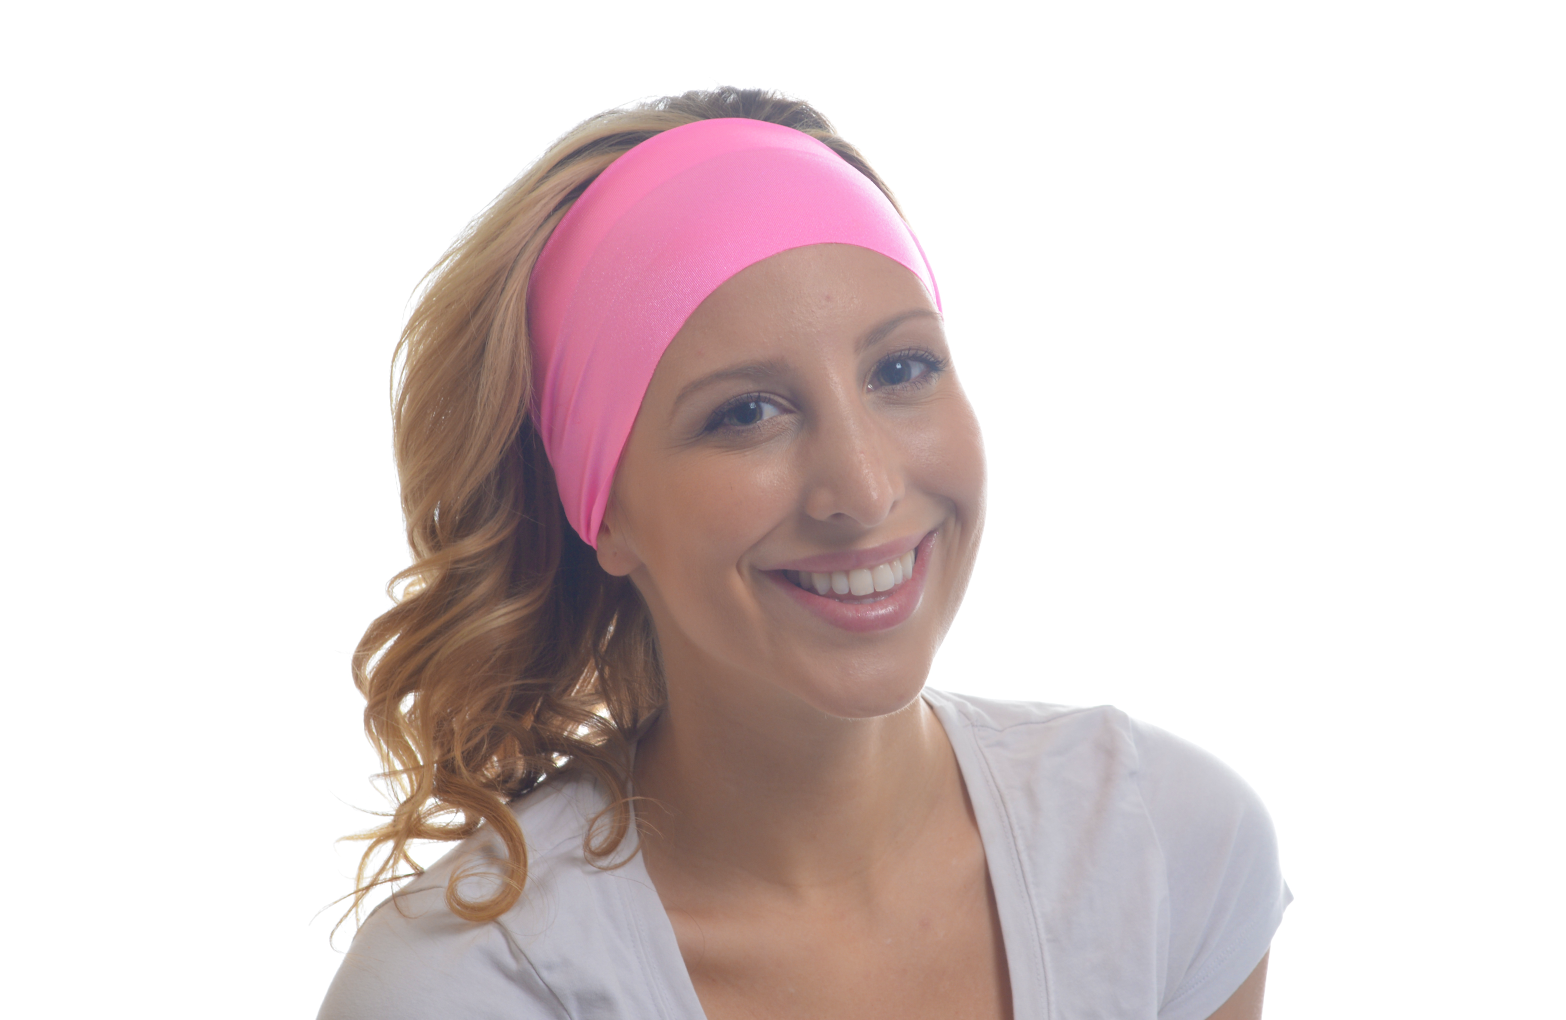 A woman wearing a pink ItFit headband with a big smile on her face